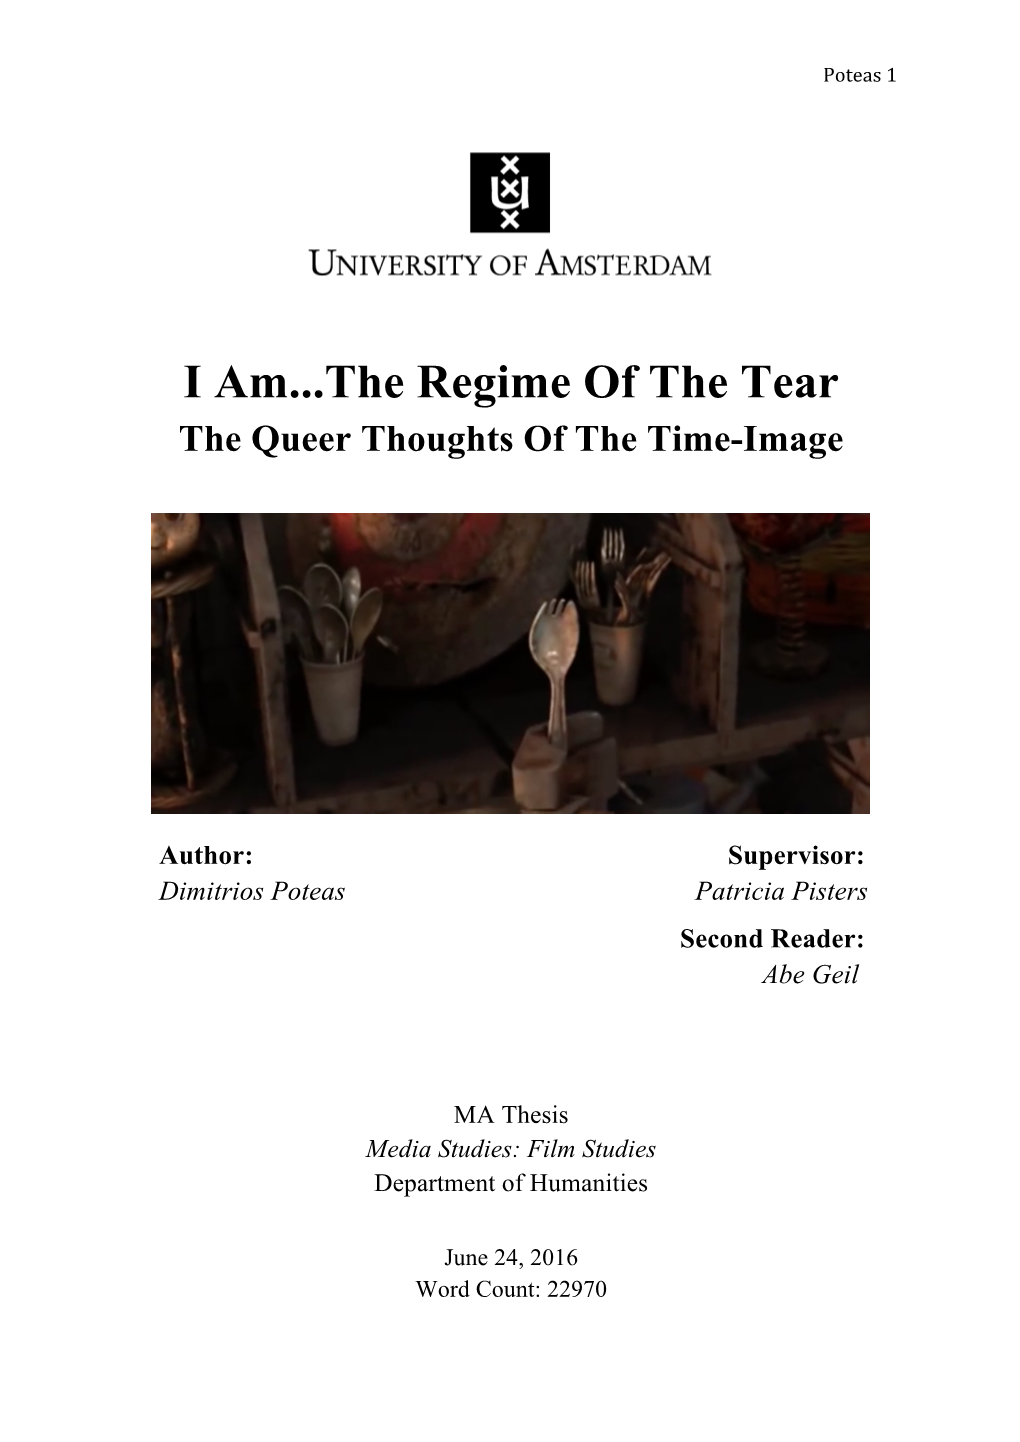 I Am...The Regime of the Tear the Queer Thoughts of the Time-Image